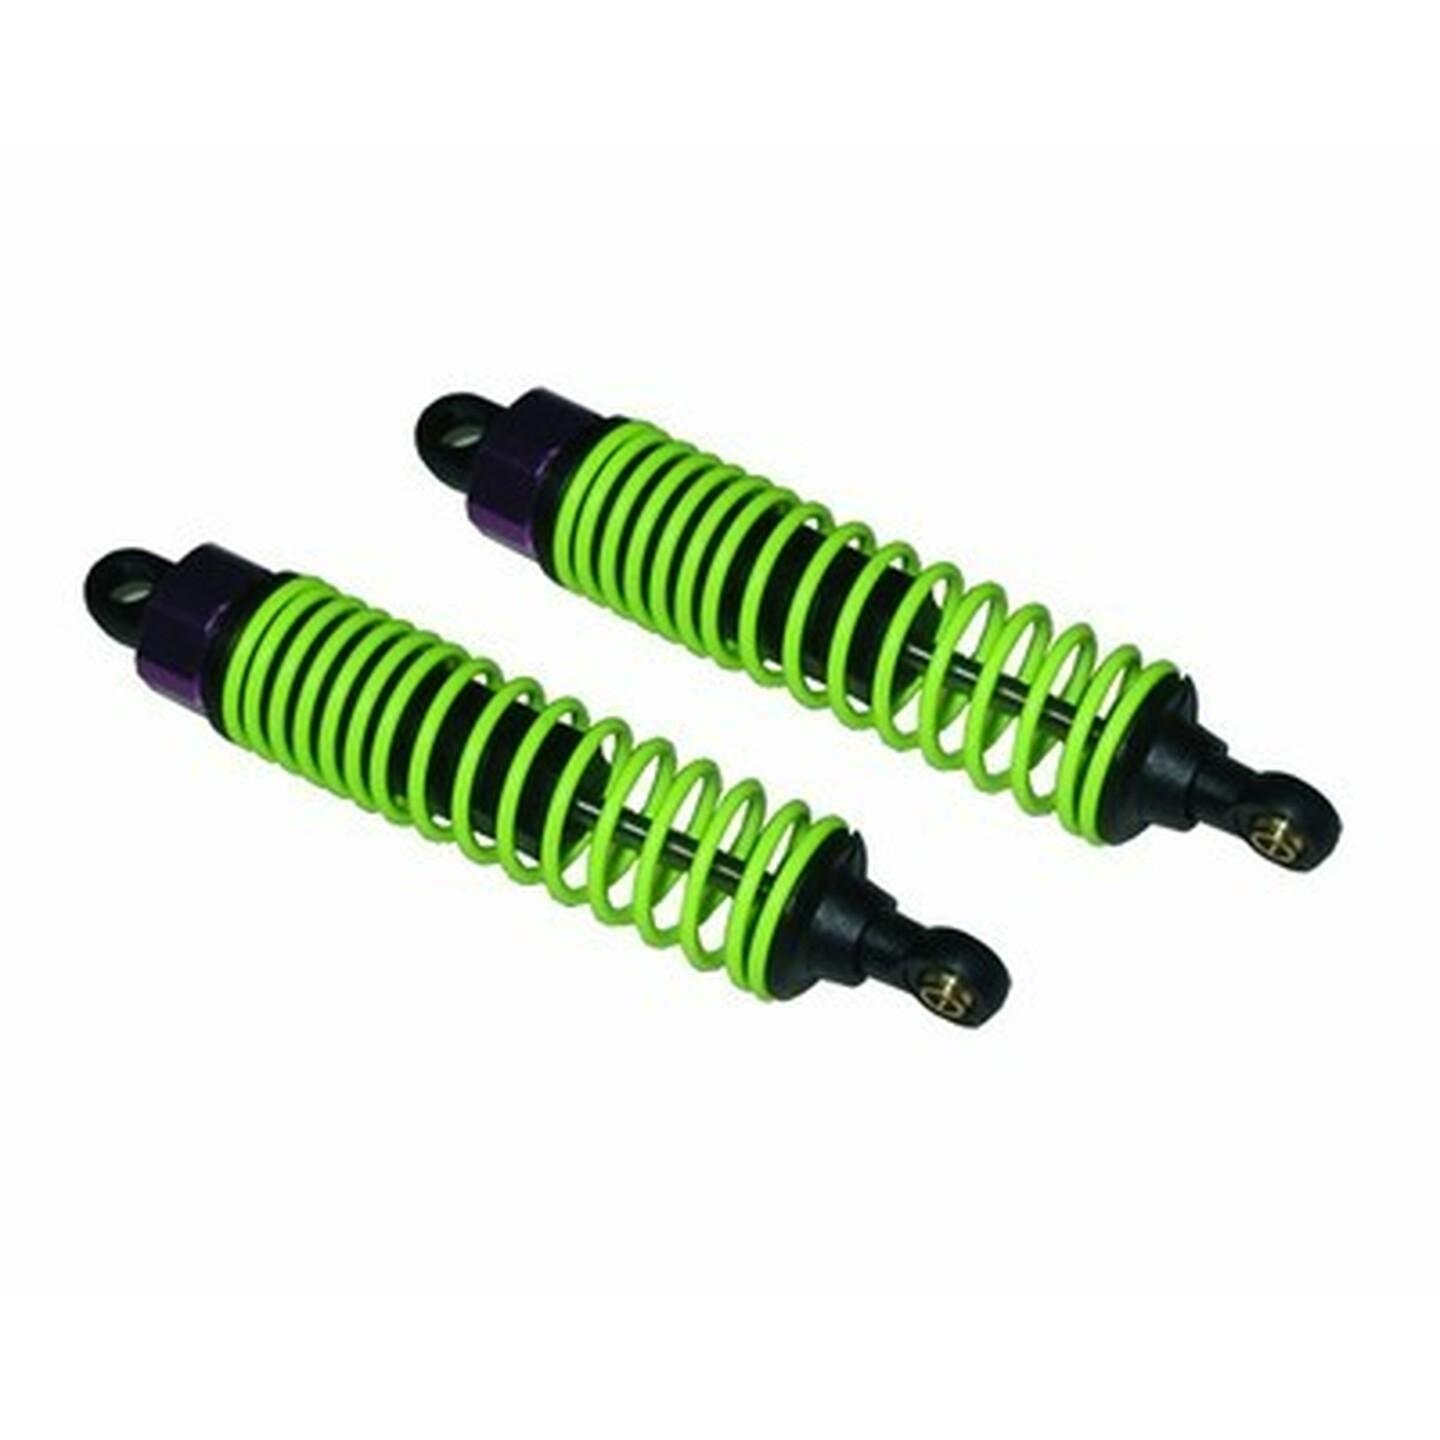 Shock Absorber for GT-3610 Buggy Pair